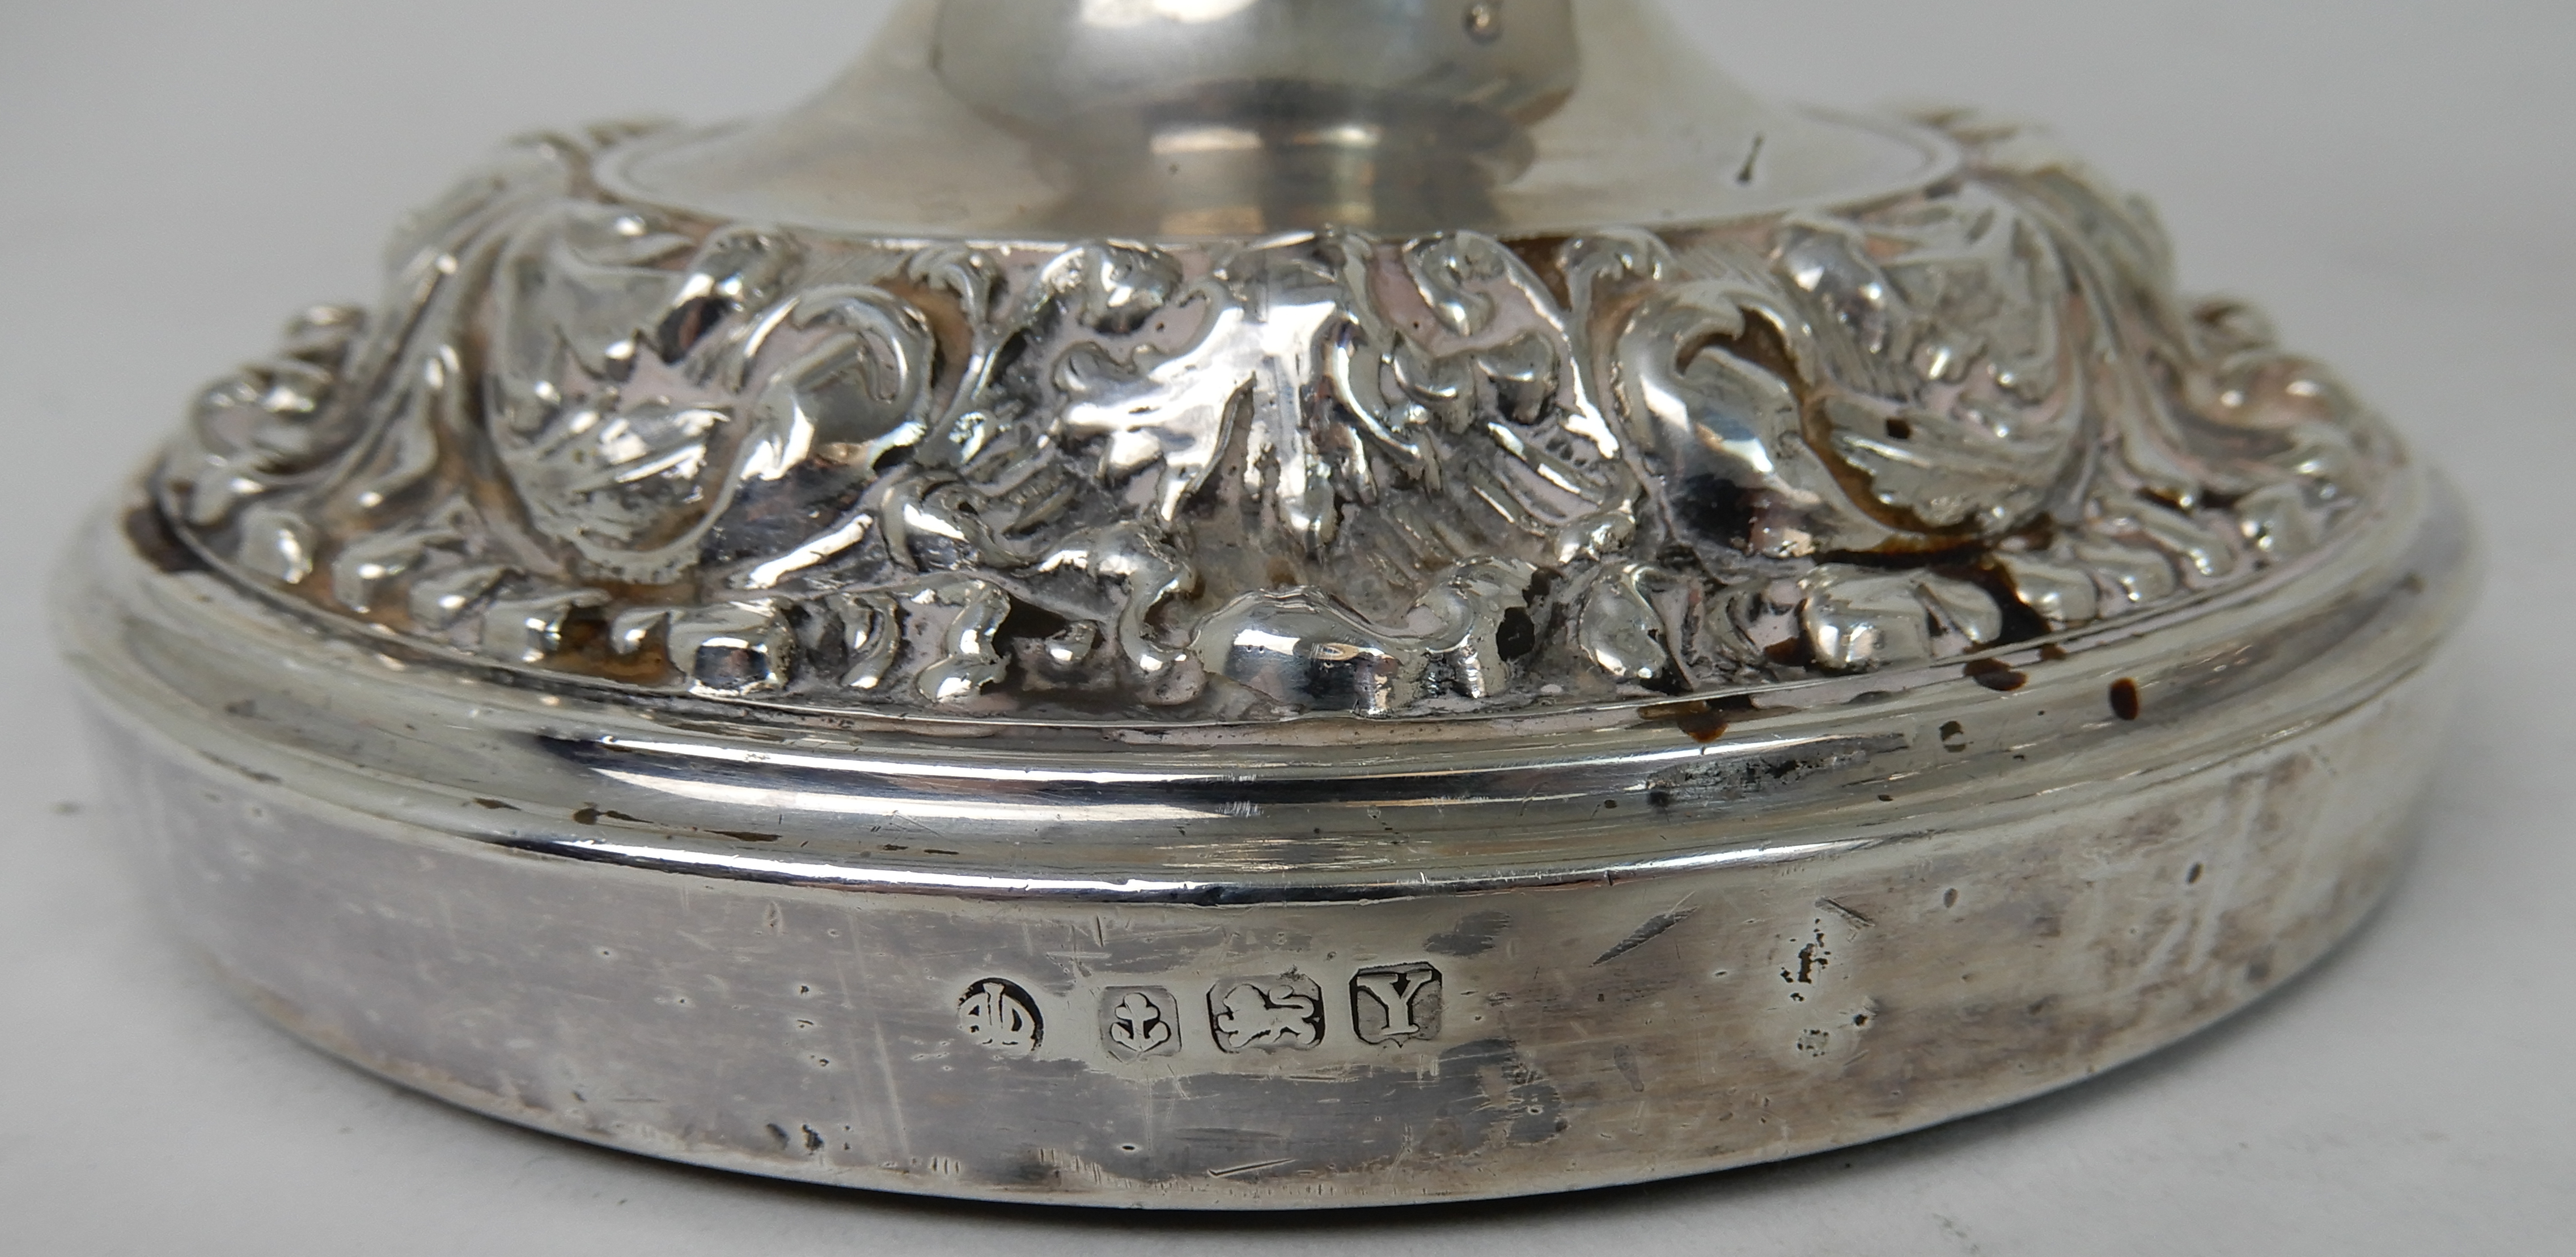 A PAIR OF SILVER CANDLESTICKS maker's mark BLD Birmingham 1948, the removable drip pans on - Image 2 of 5